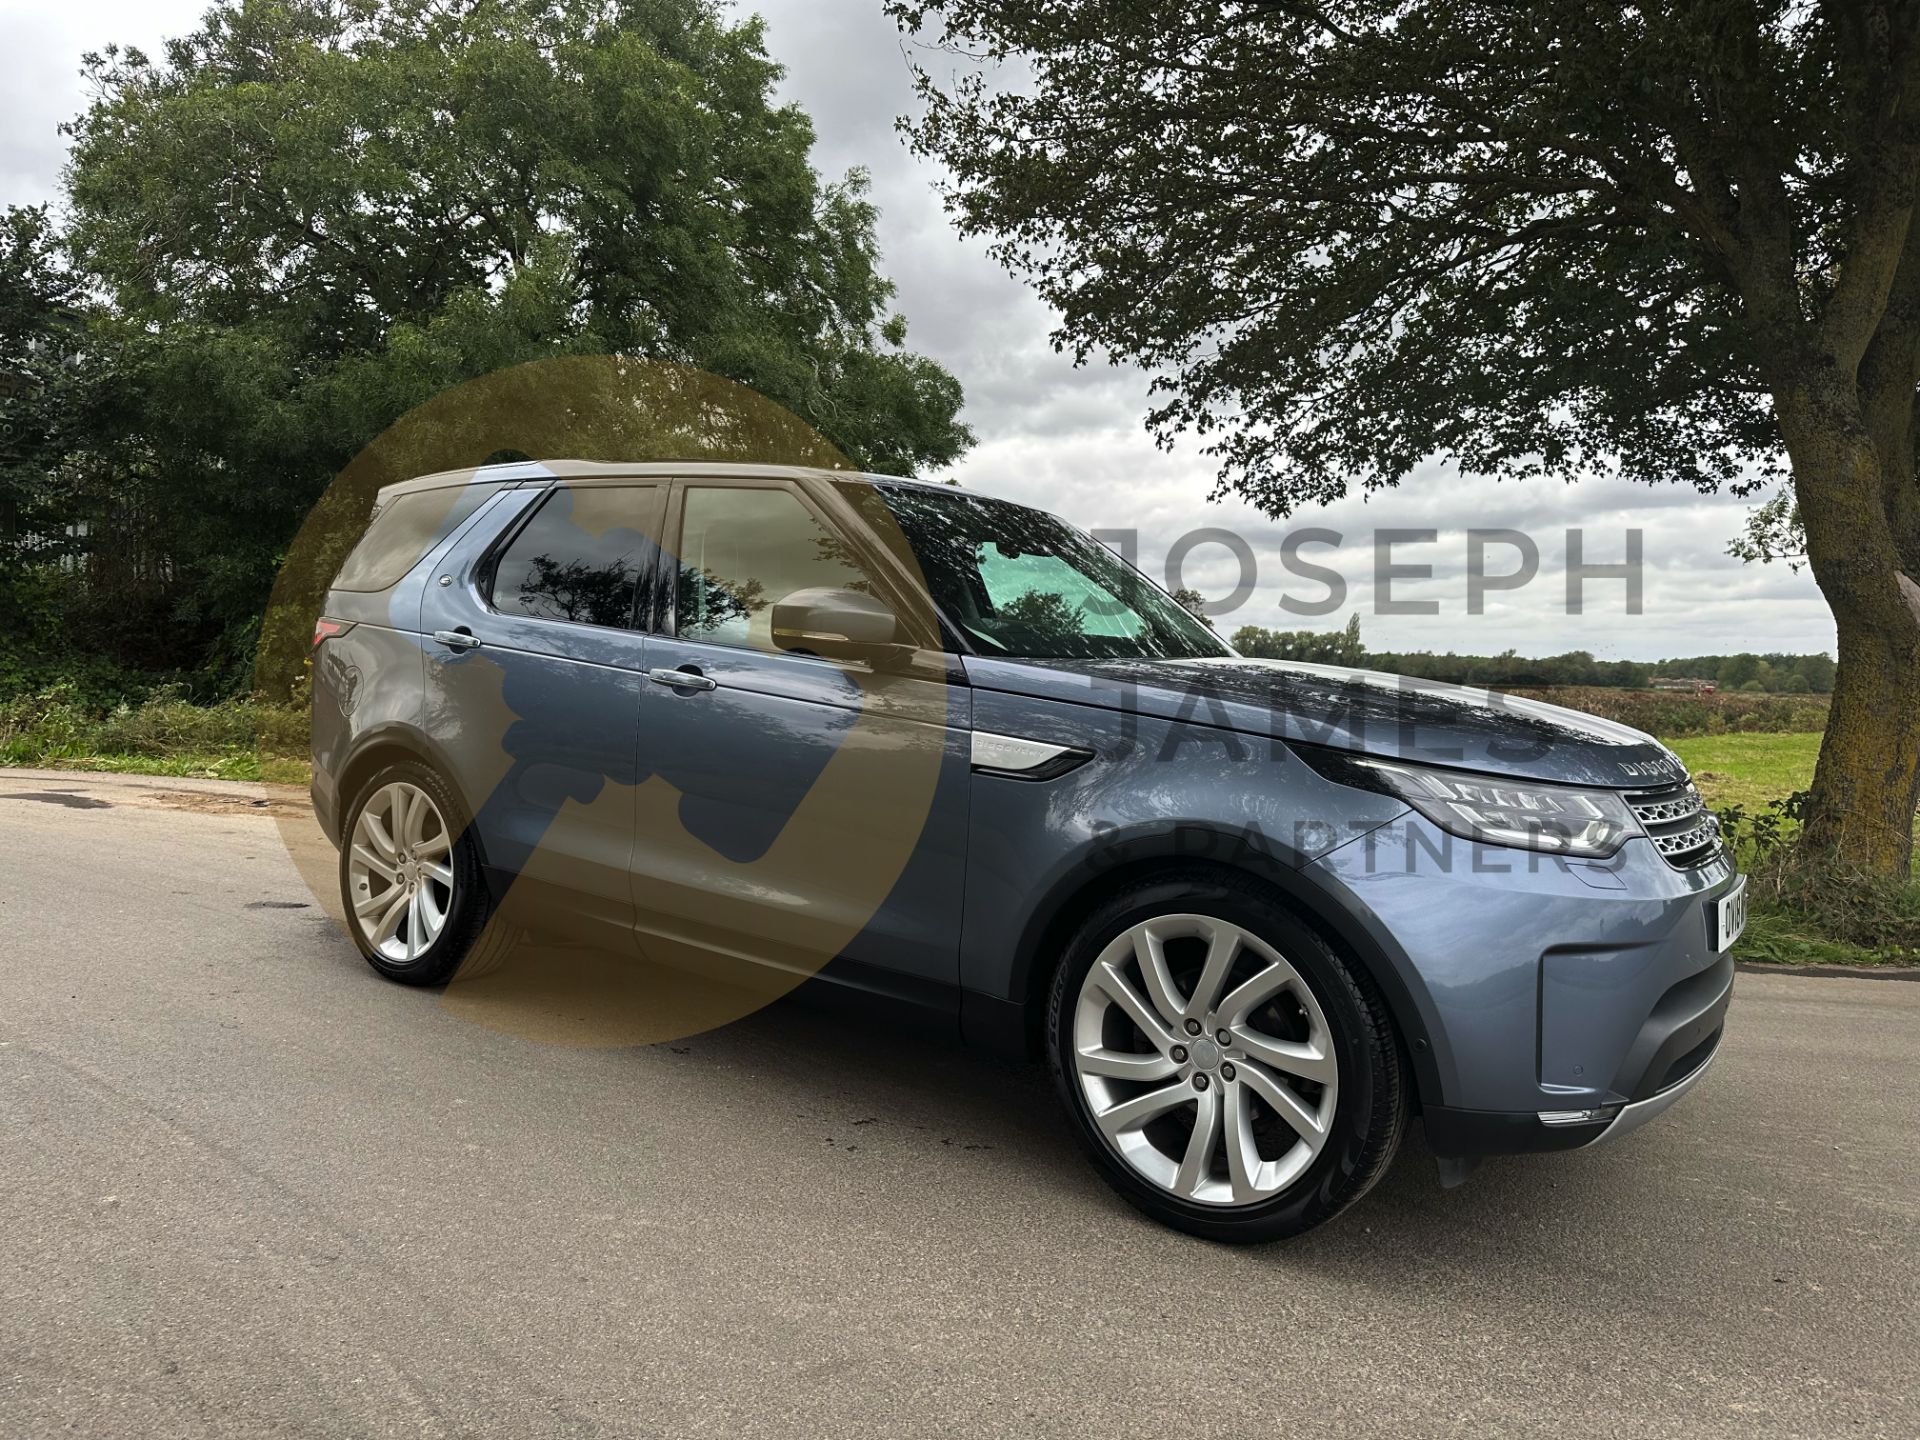 (ON SALE) LAND ROVER DISCOVERY 5 *HSE LUXURY* 7 SEATER SUV (2018 - FACELIFT MODEL) (LOW MILEAGE) - Image 2 of 66